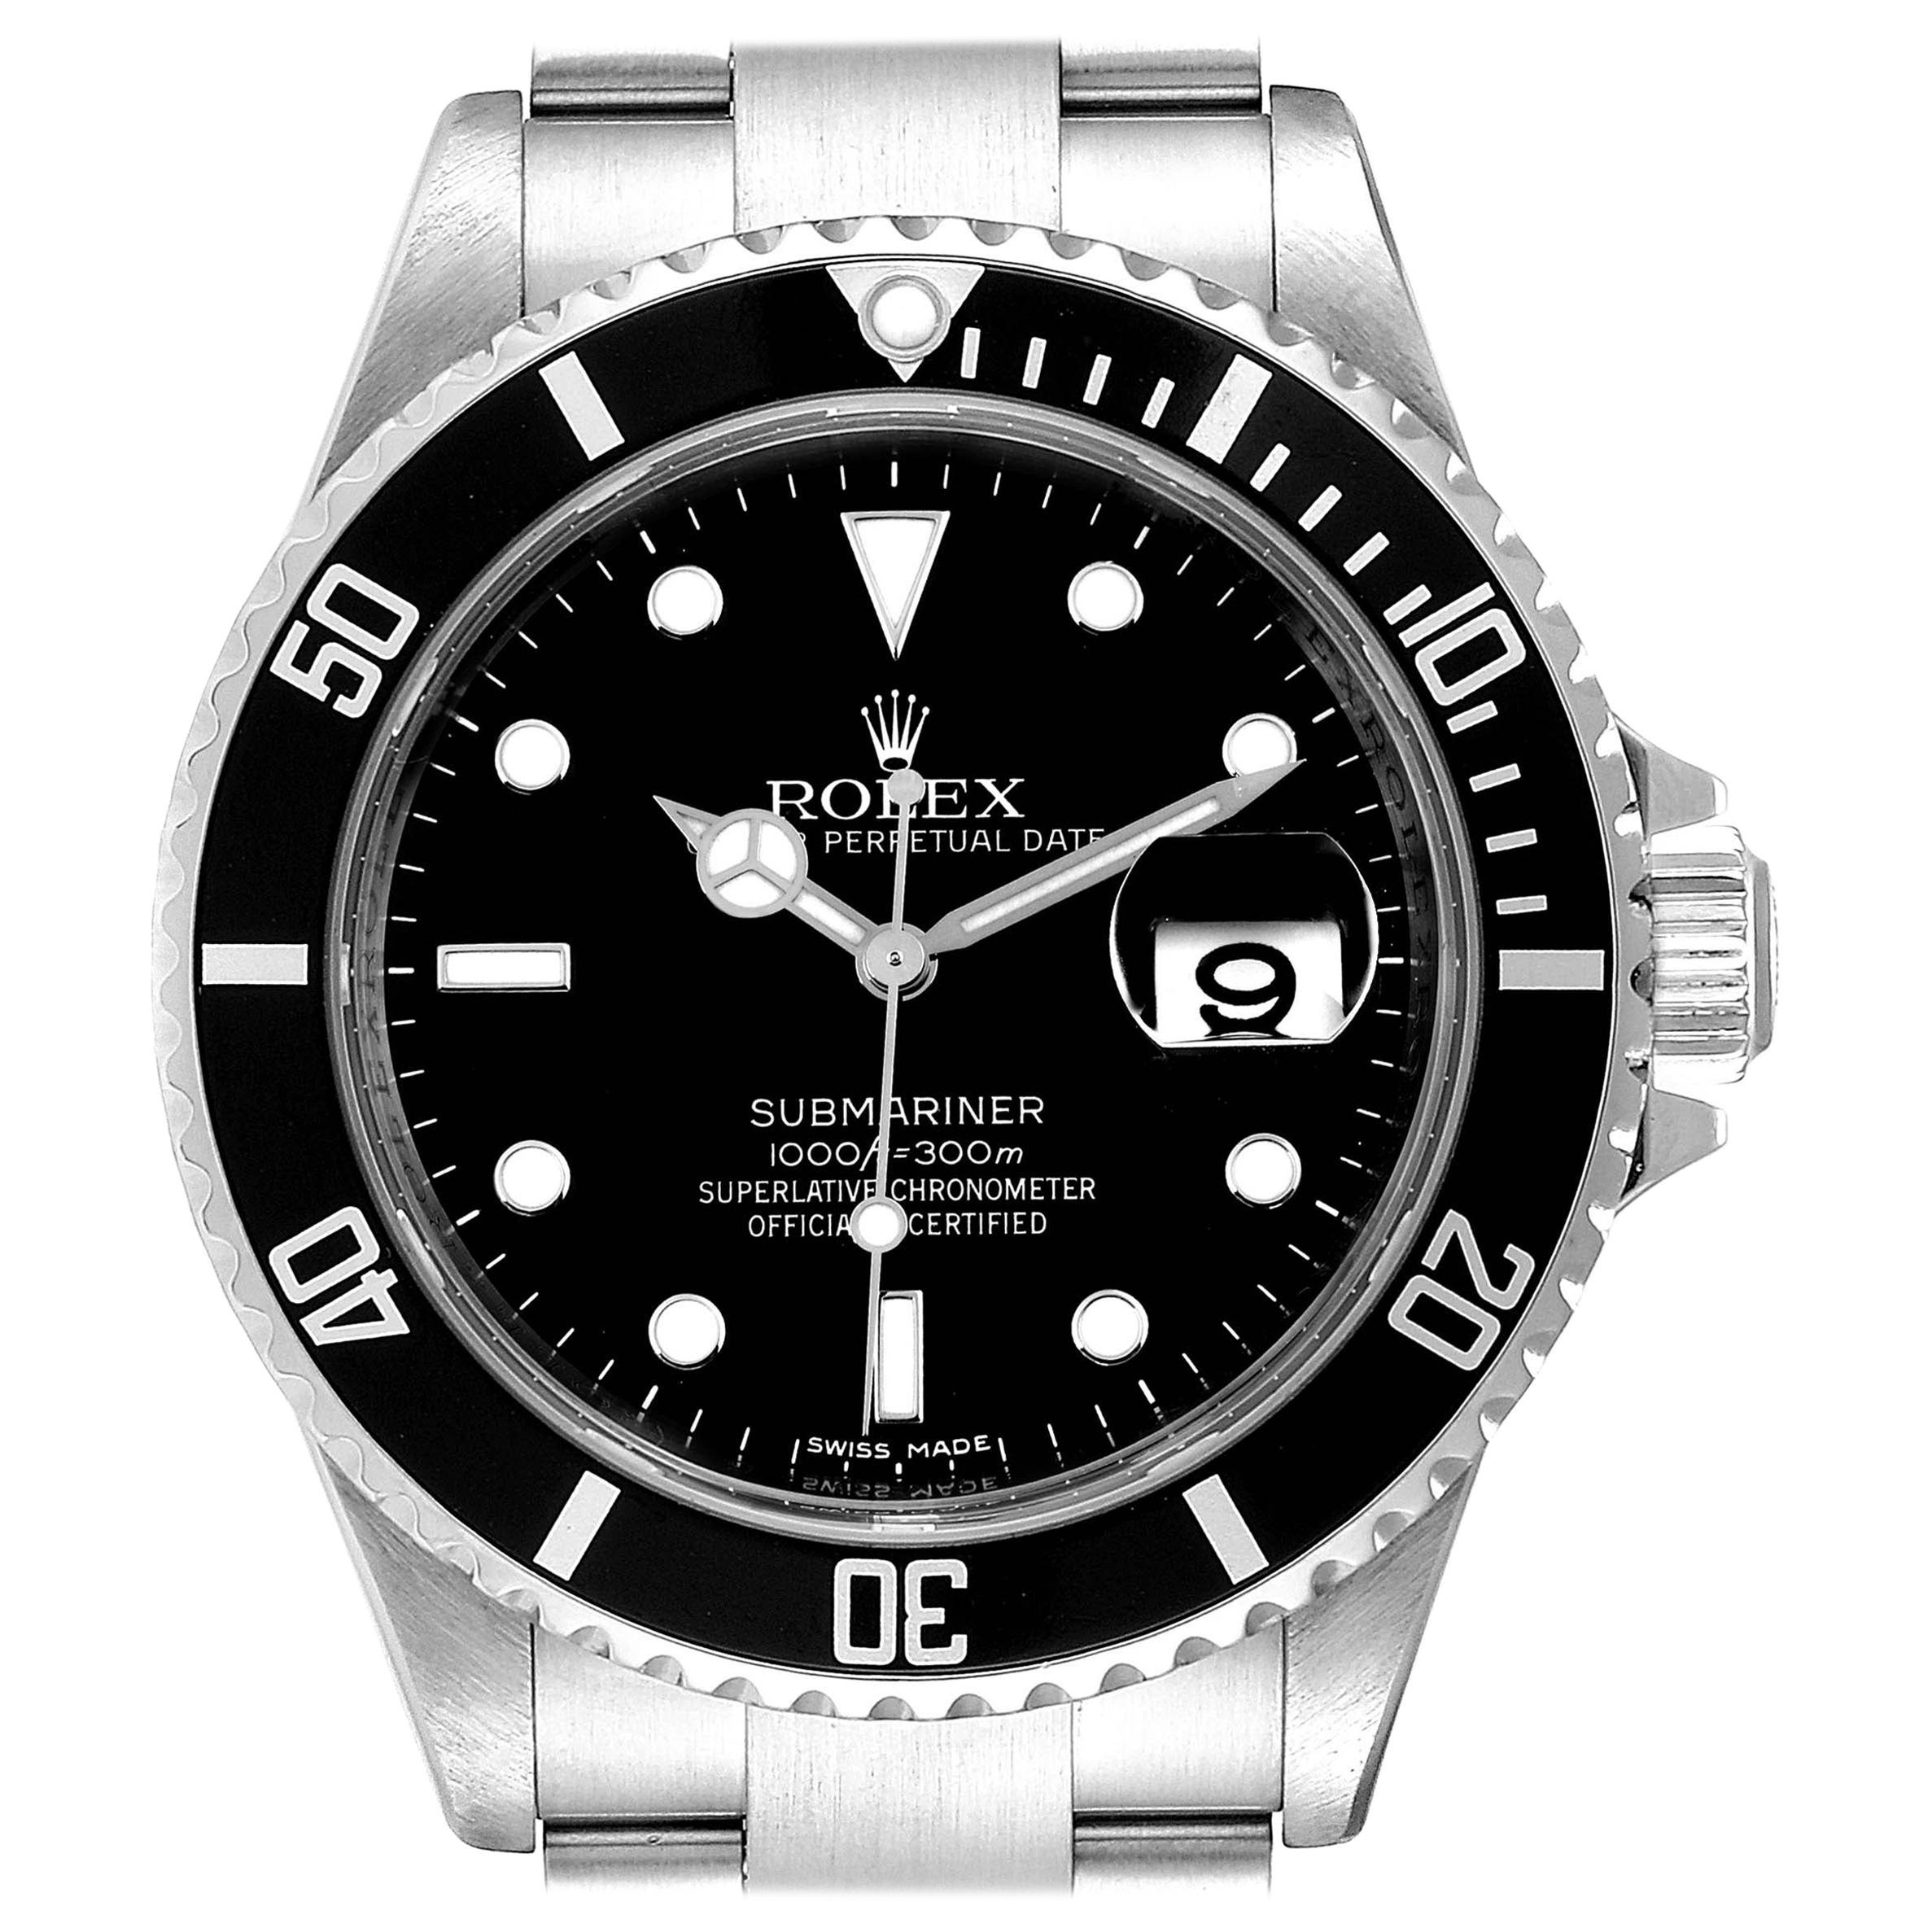 Rolex Submariner Date Stainless Steel Men's Watch 16610 Box Card For Sale